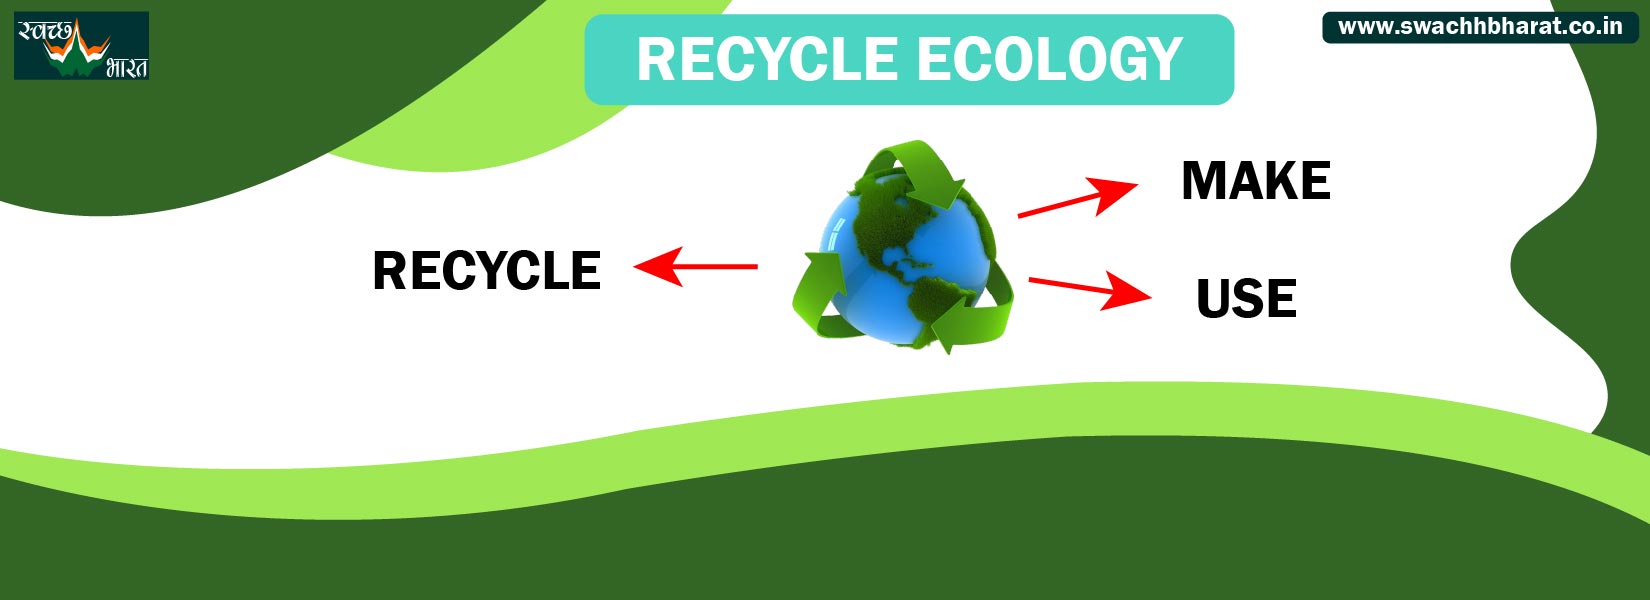 Recycle Ecology